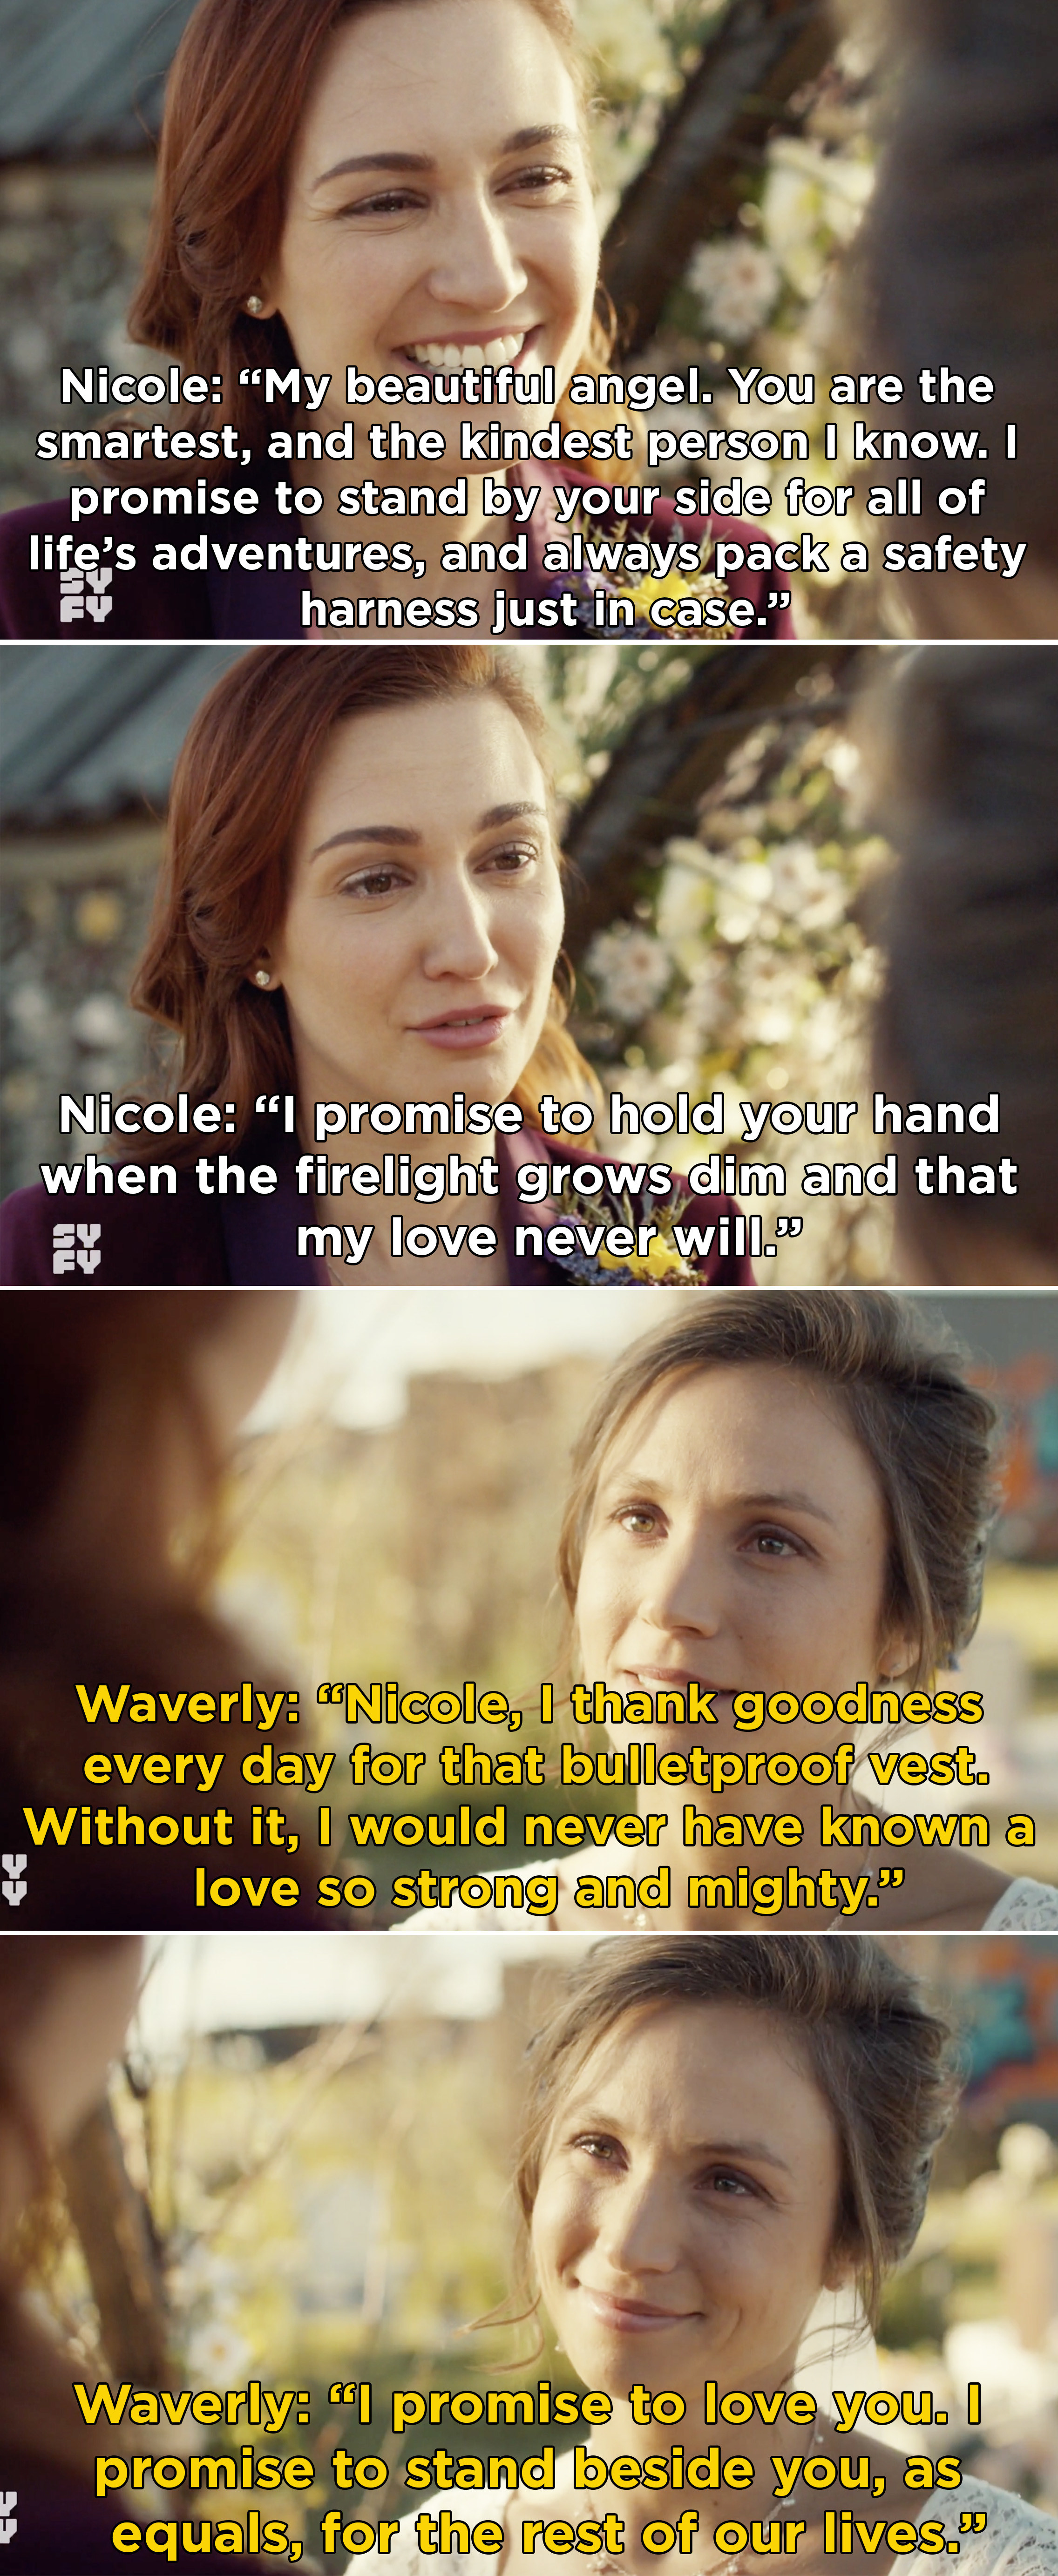 Nicole and Waverly saying their vows at their wedding